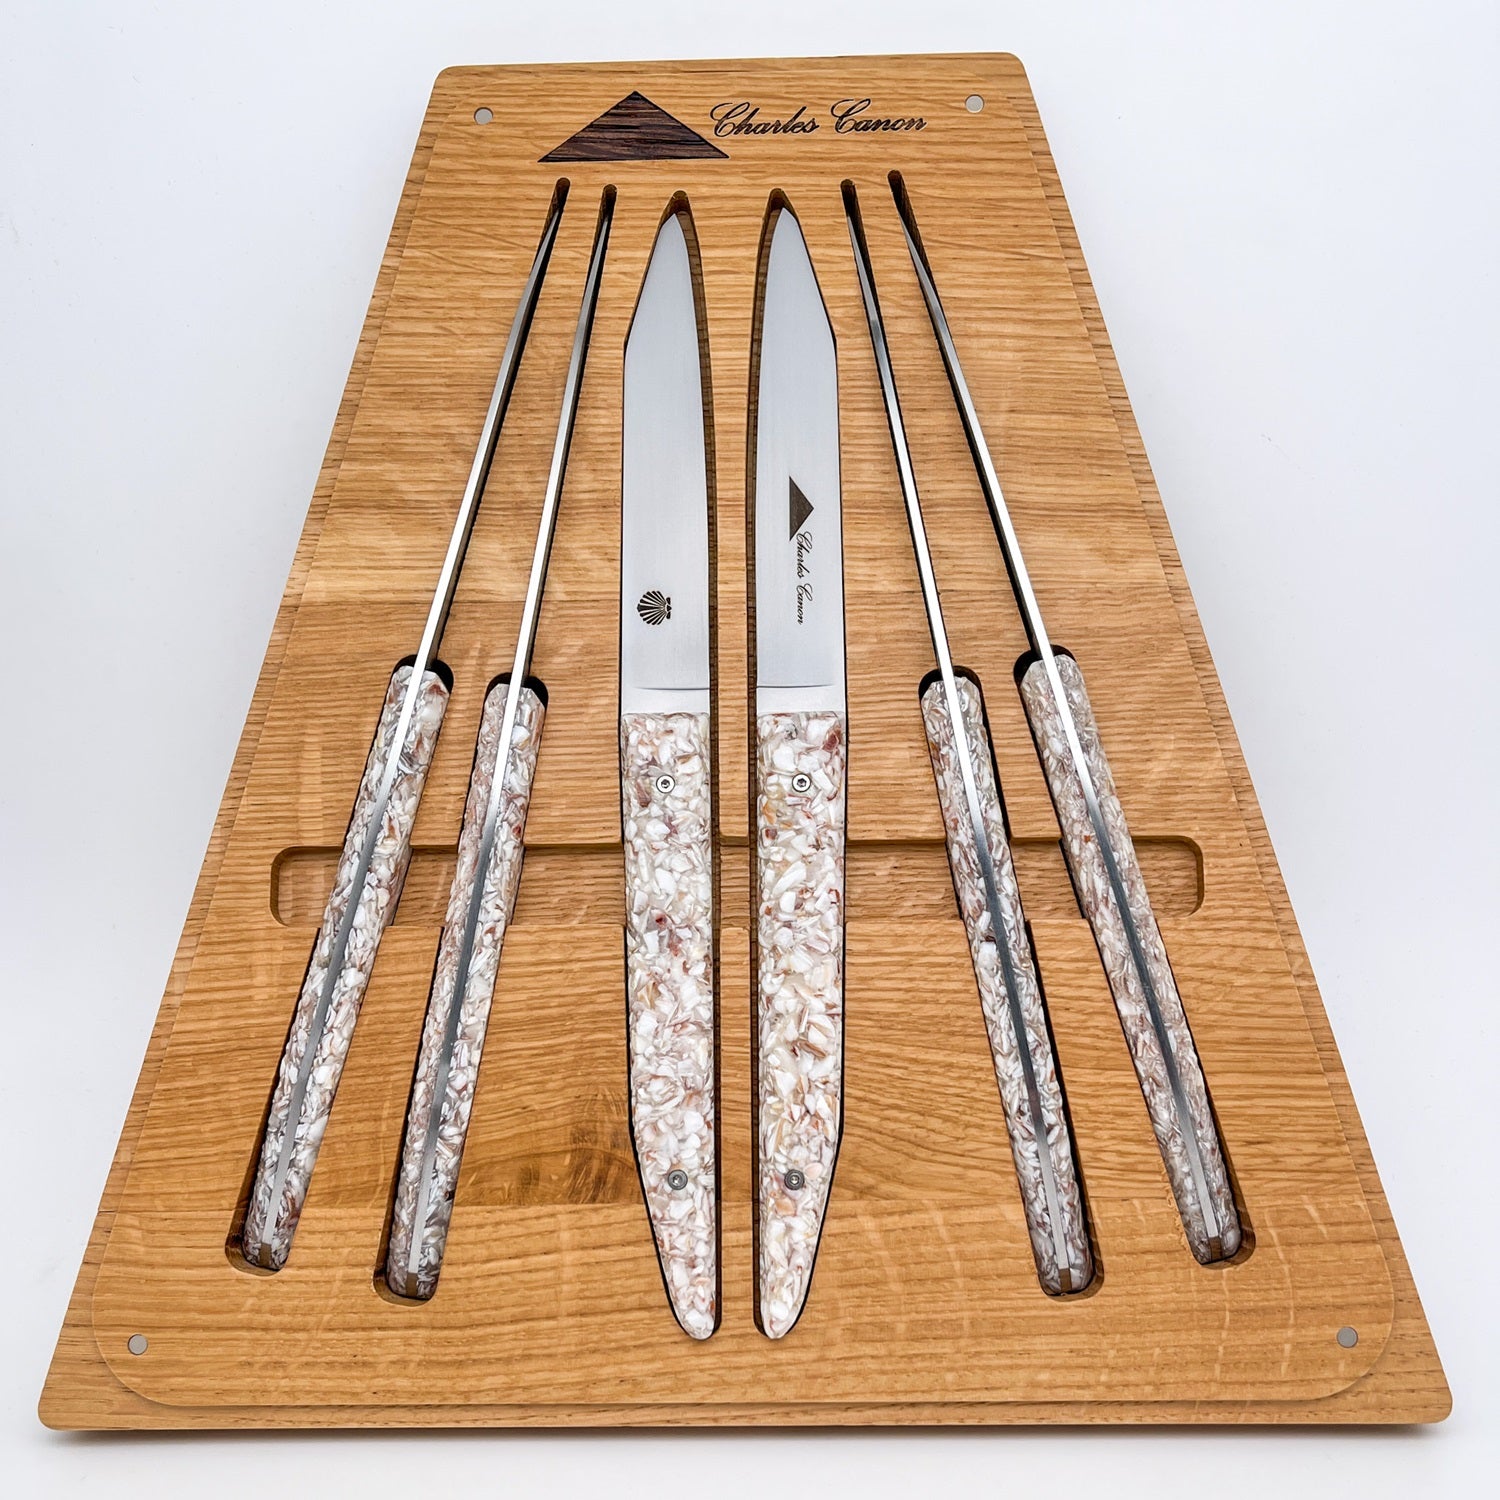 6 table knives with scallop shell handles